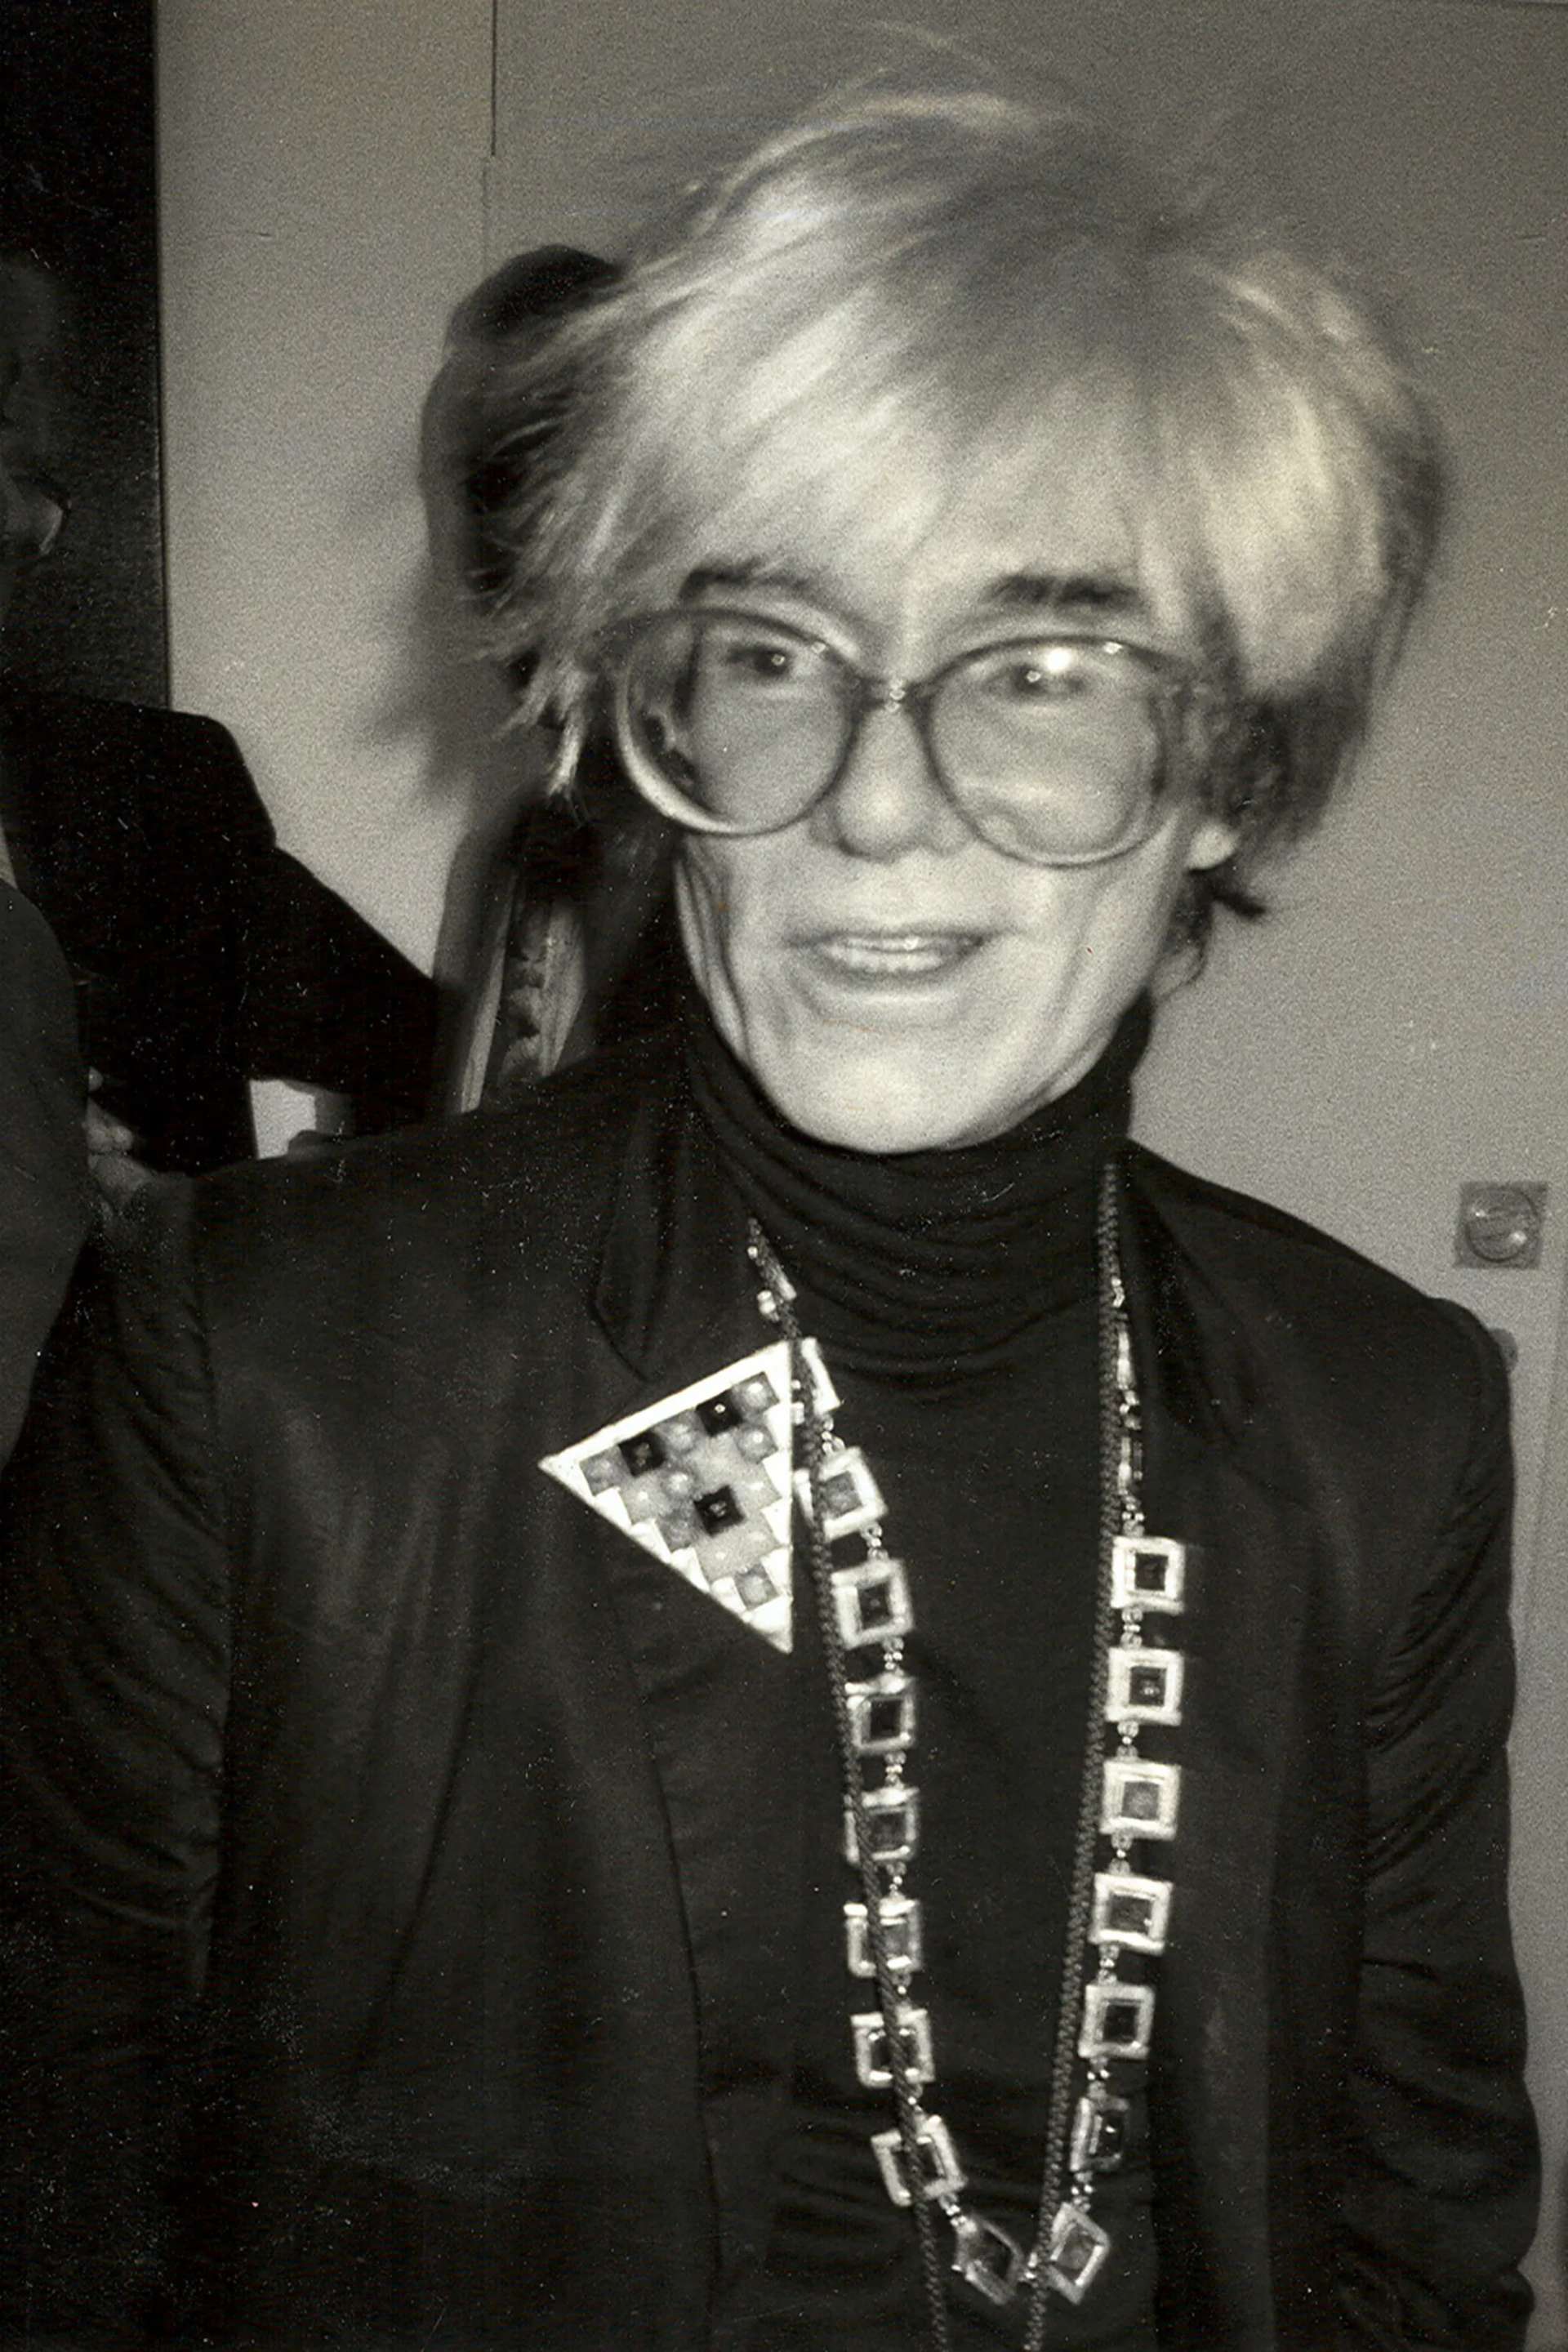 Image © British Vogue / Andy Warhol in BillyBoy’s Joan of Arc necklace